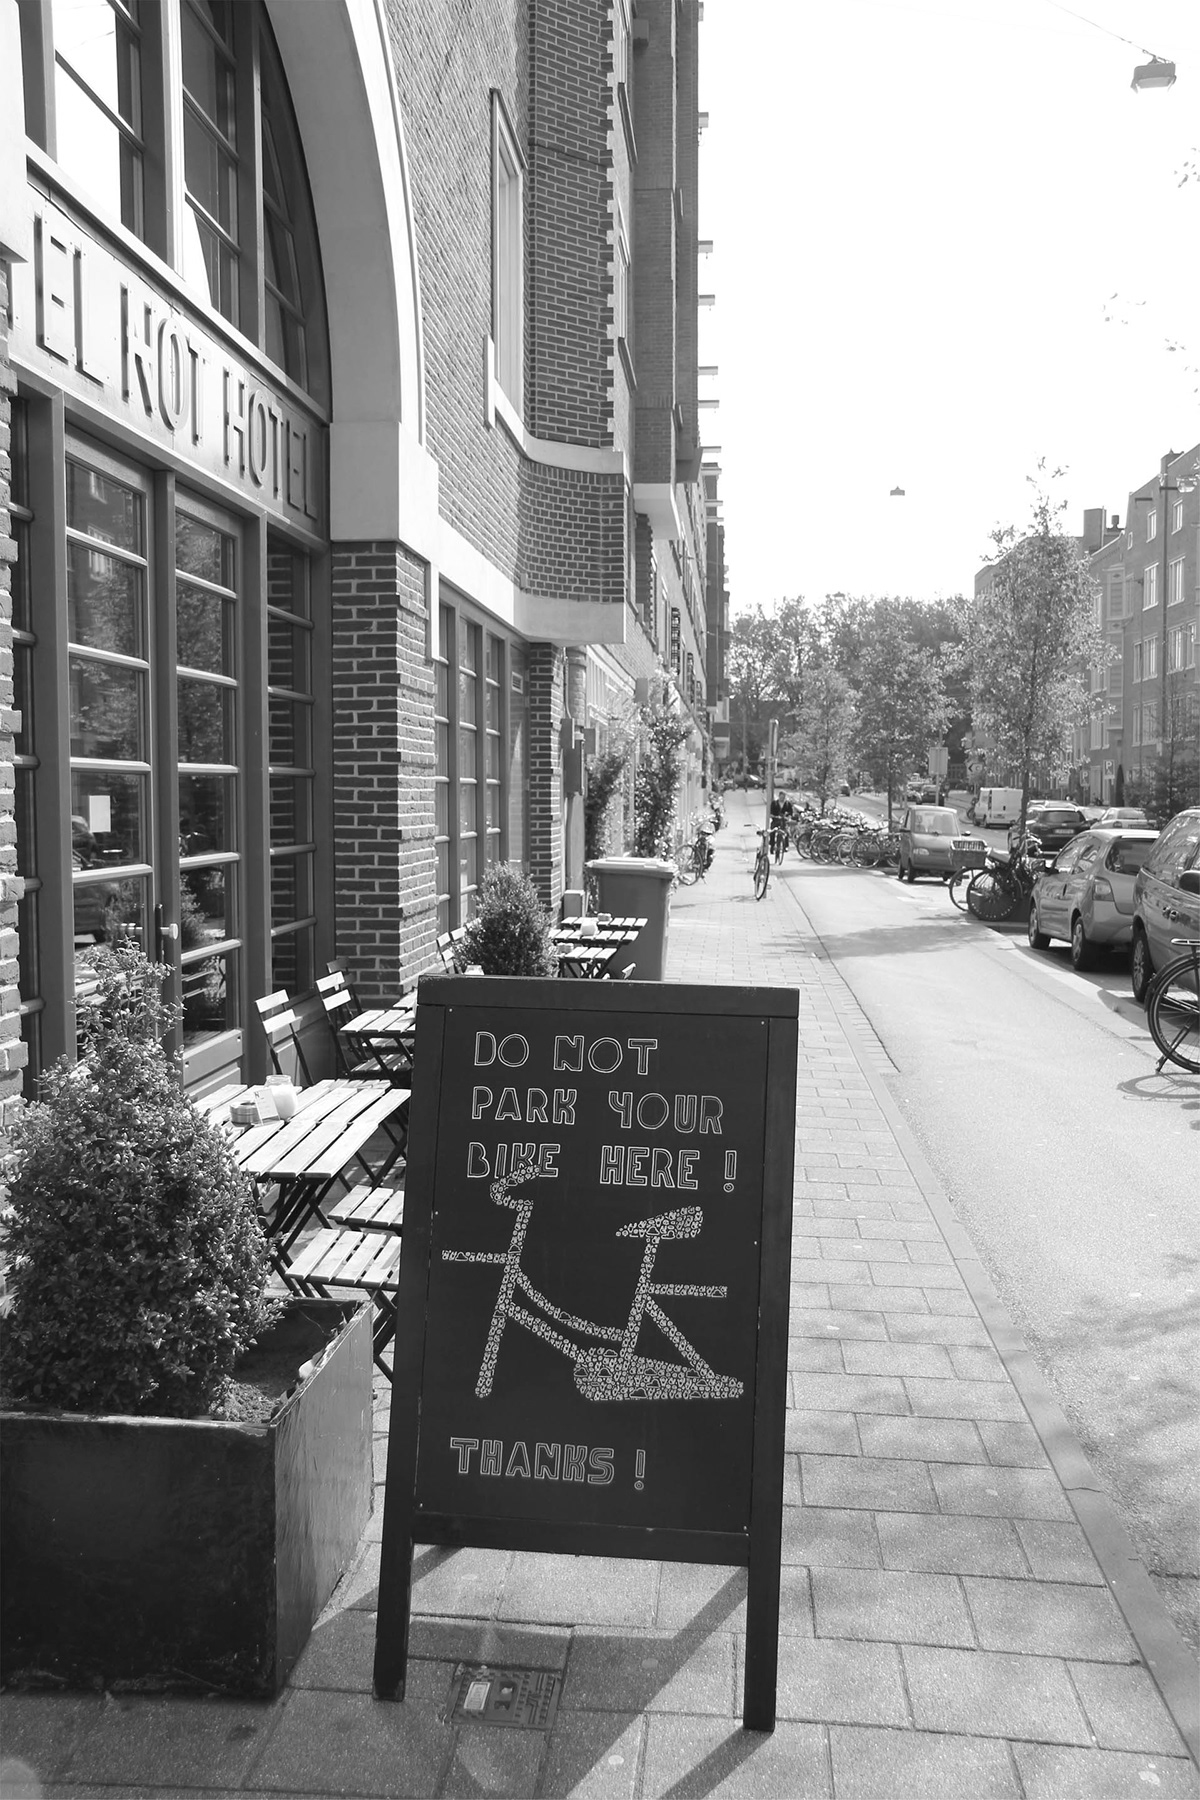 people Bike no parking coffee to go hotel not hotel hotel amsterdam